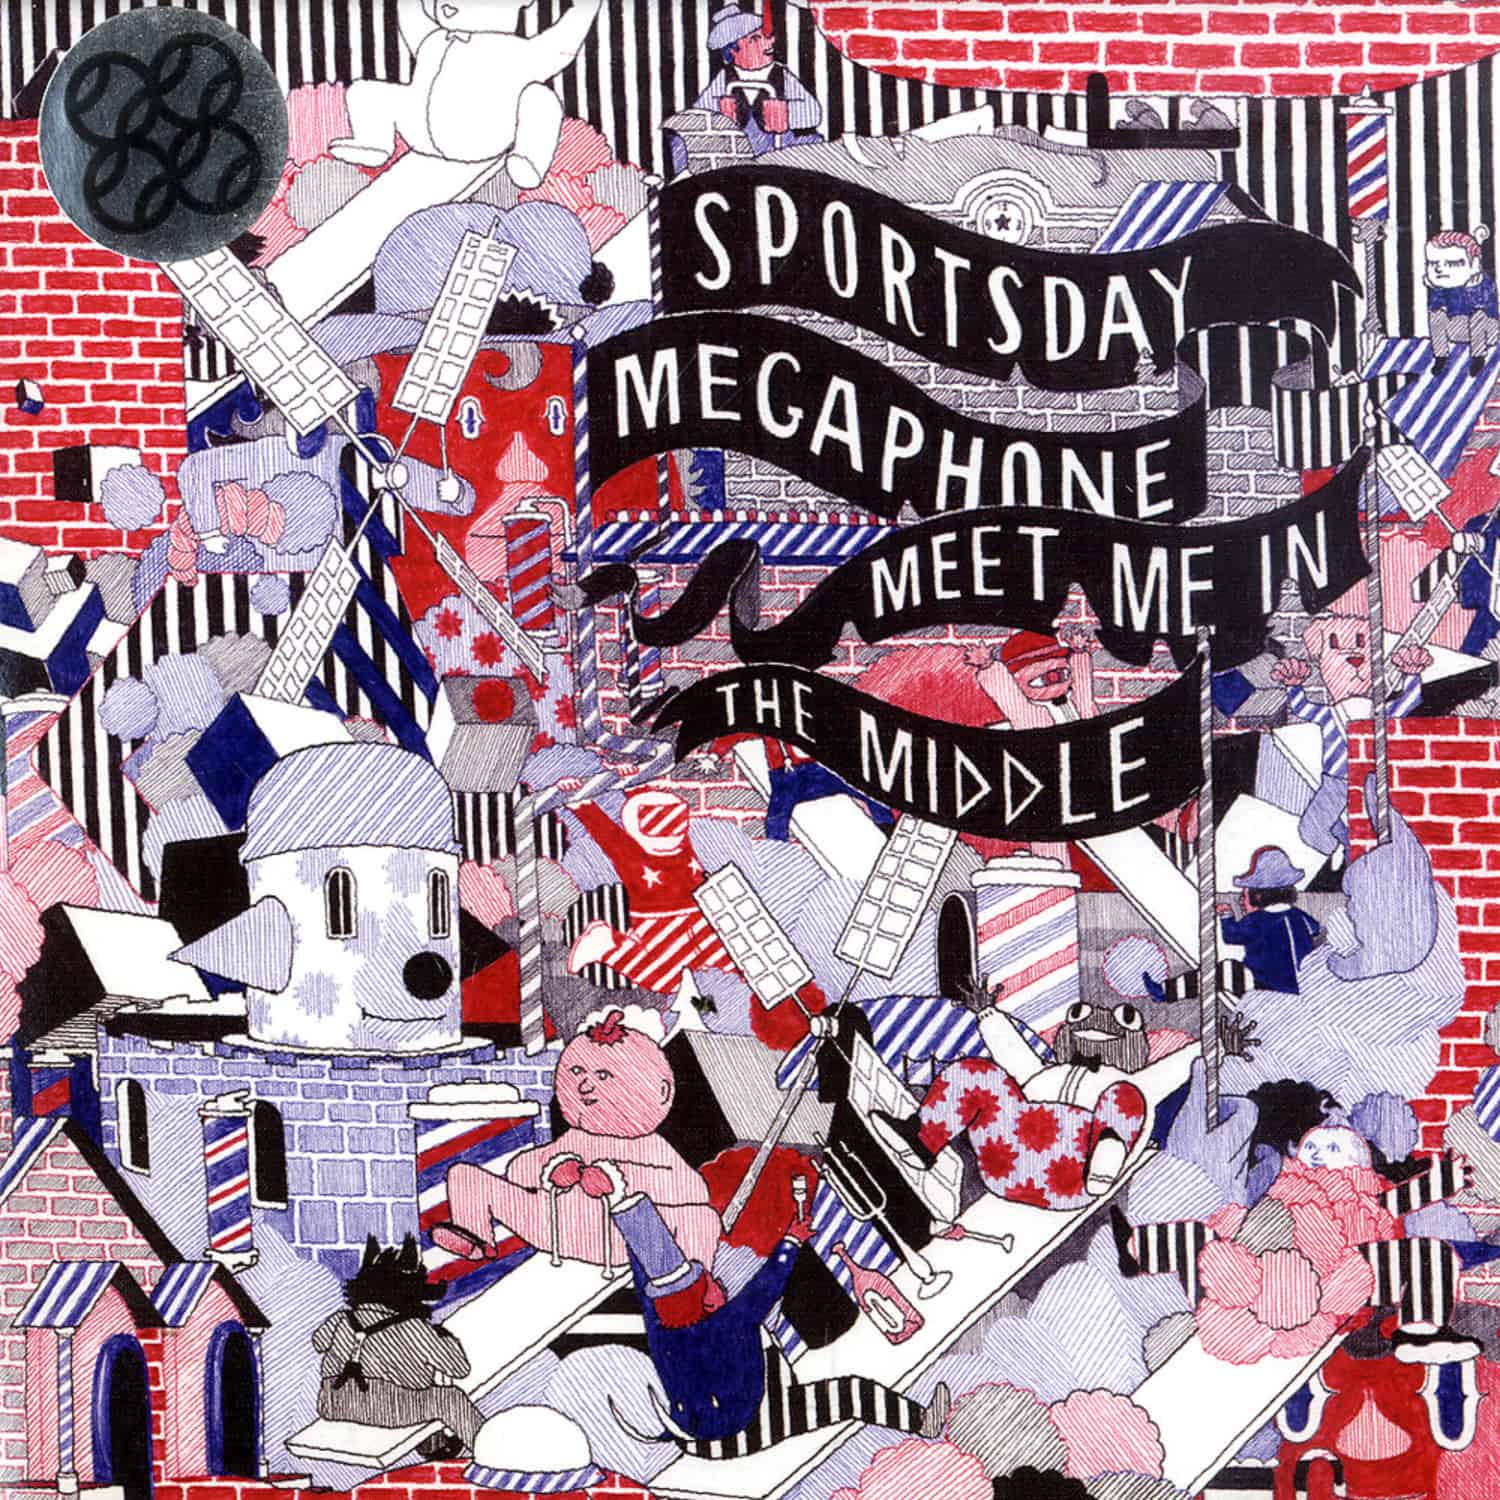 Sportsday Megaphone - MEET ME IN THE MIDDLE 